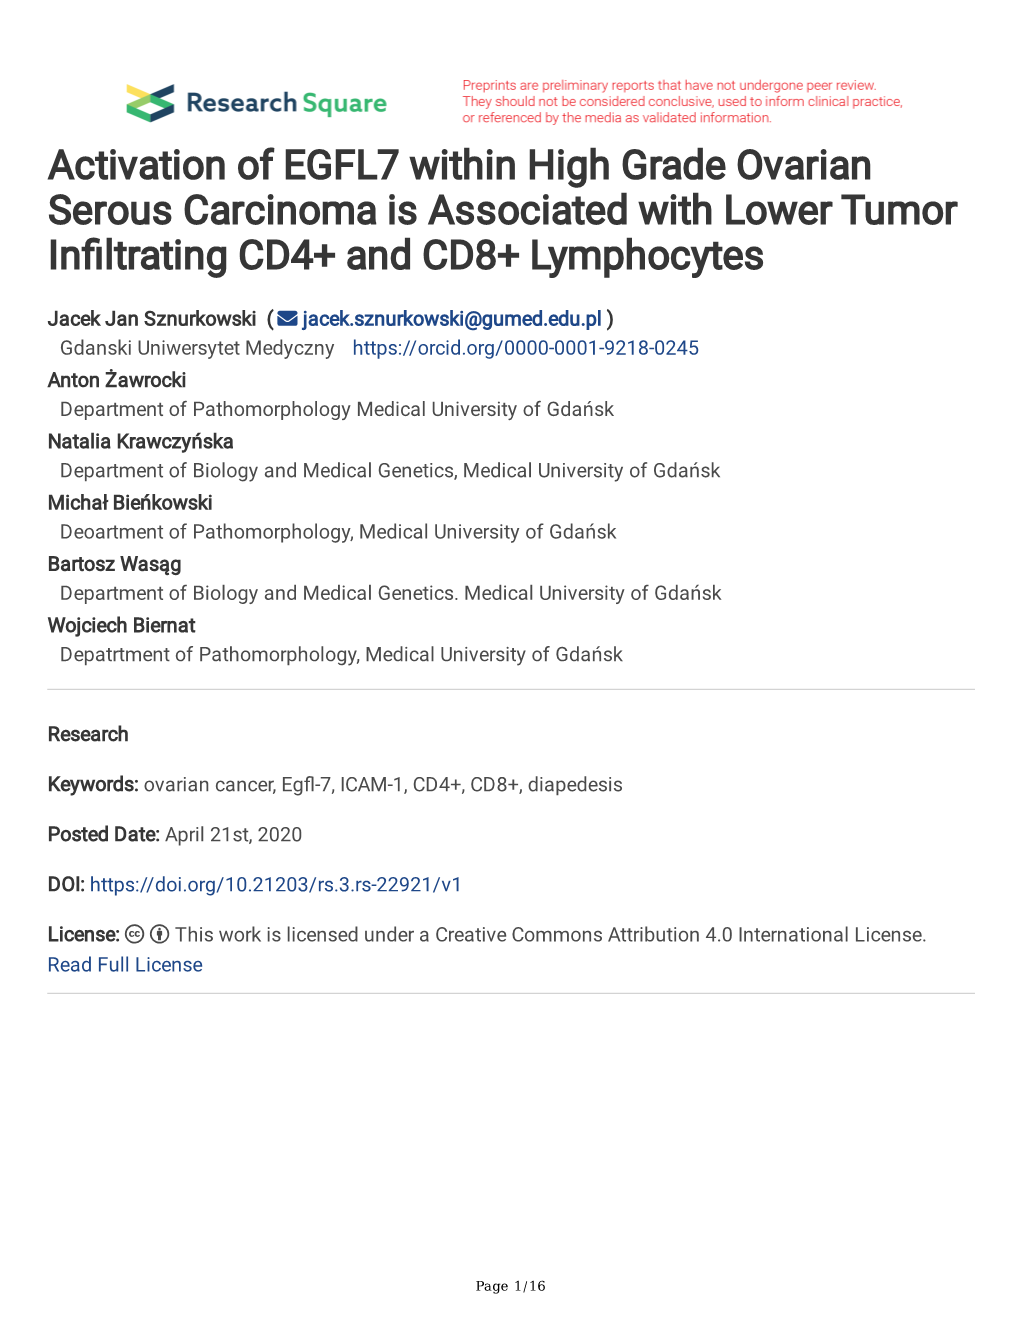 Activation of EGFL7 Within High Grade Ovarian Serous Carcinoma Is Associated with Lower Tumor Infltrating CD4+ and CD8+ Lymphocytes